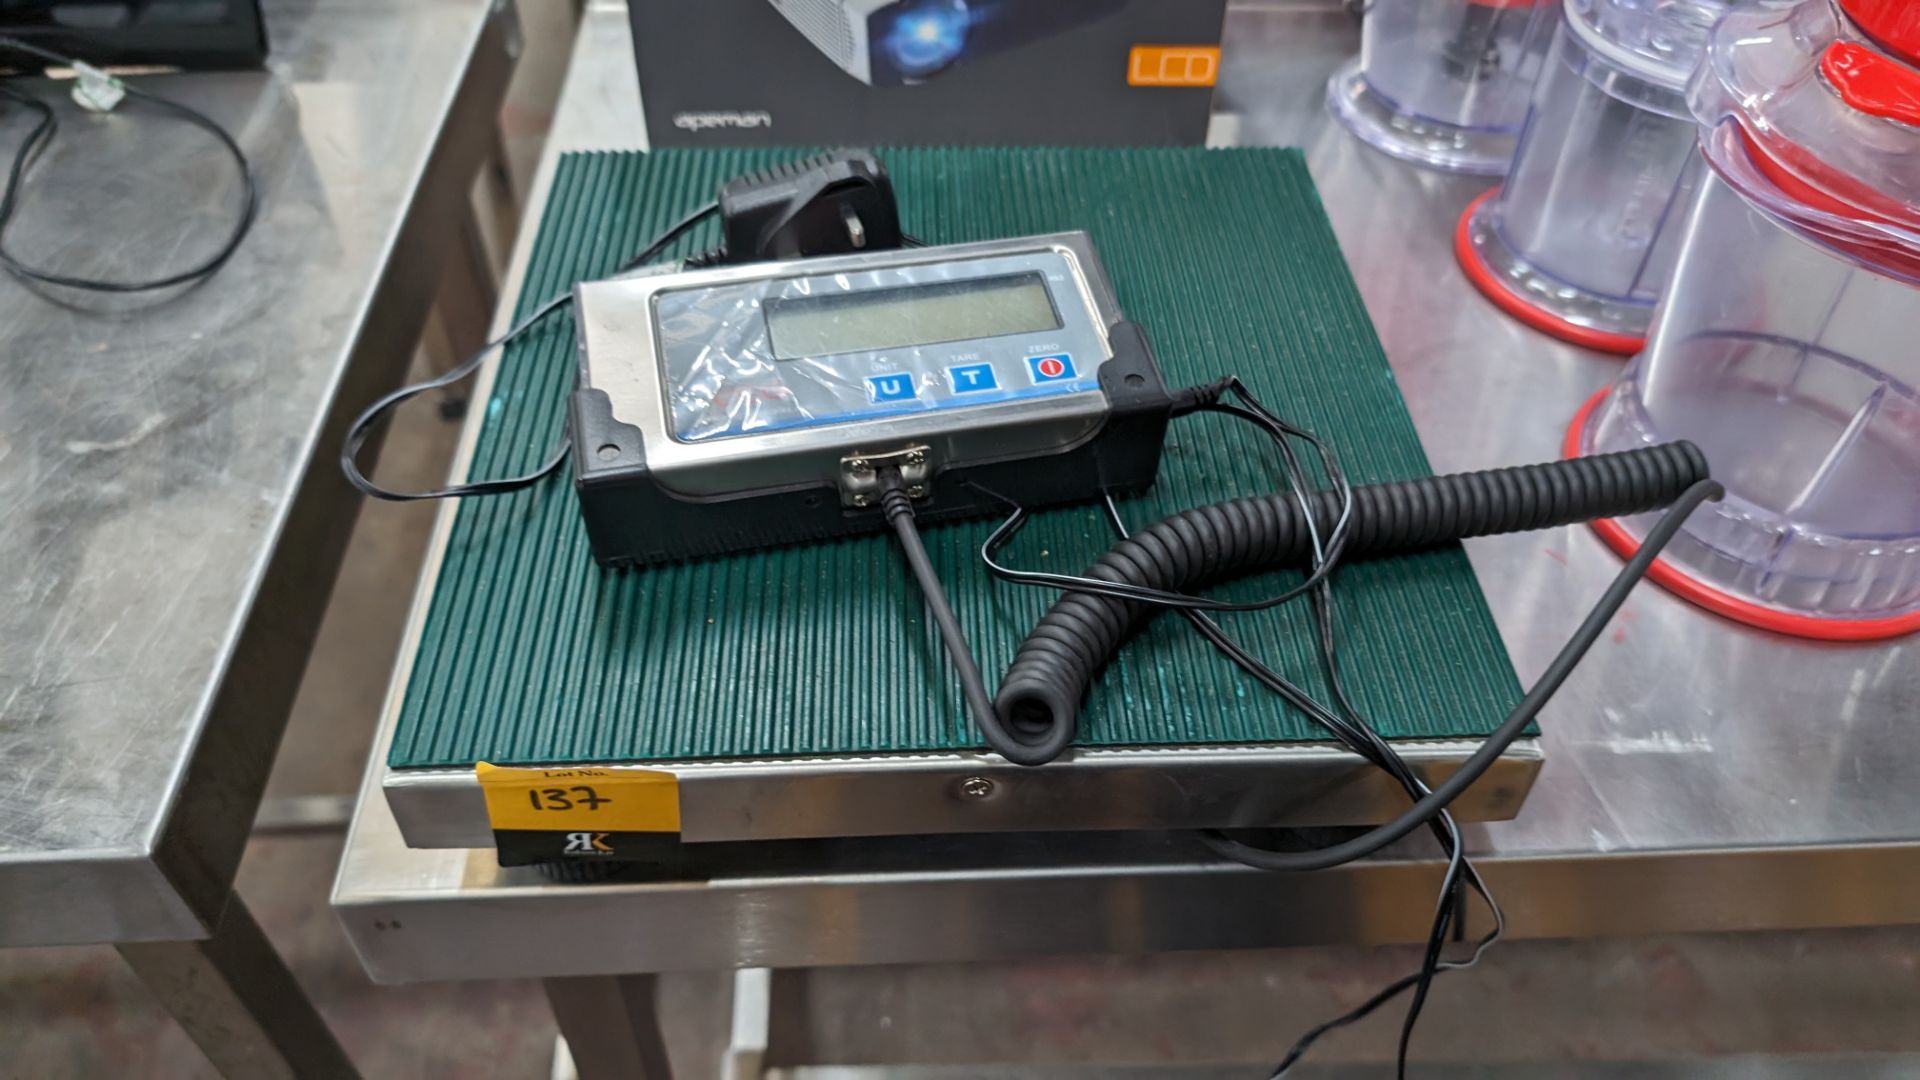 CSG small platform scales with wired digital display - Image 2 of 5